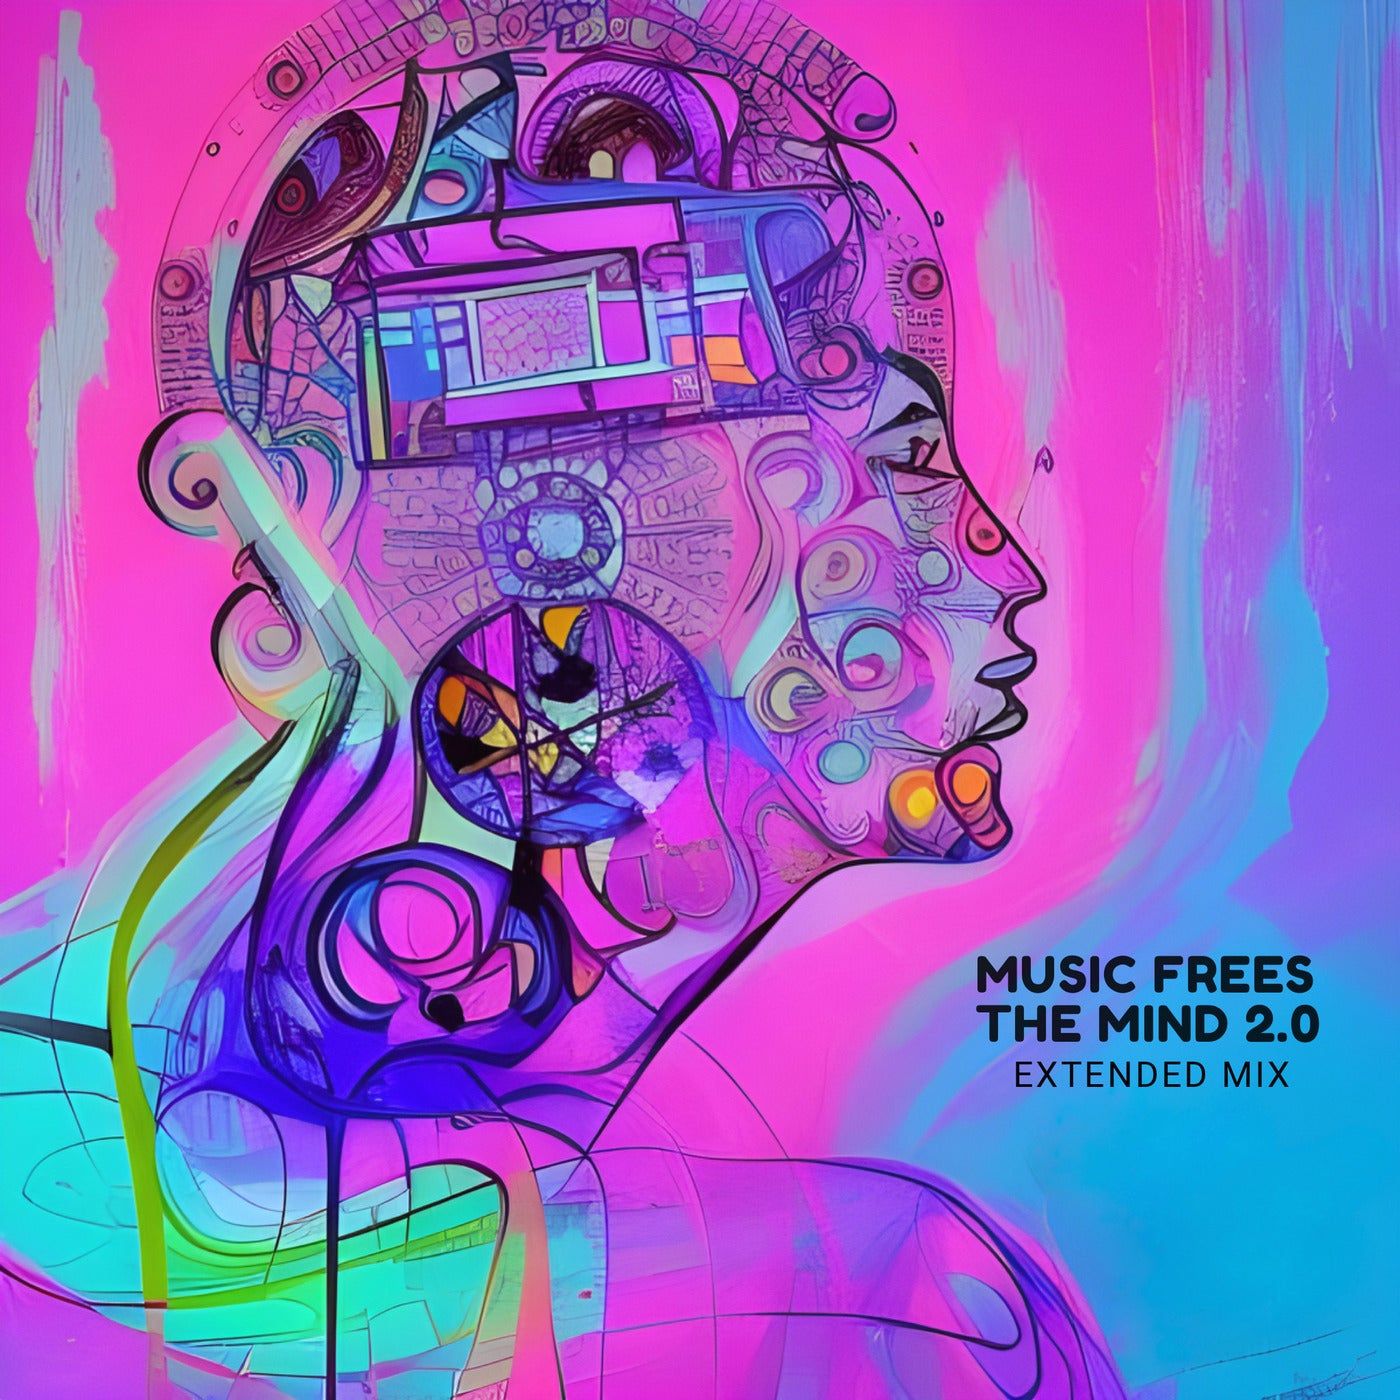 Music Frees The Mind 2.0